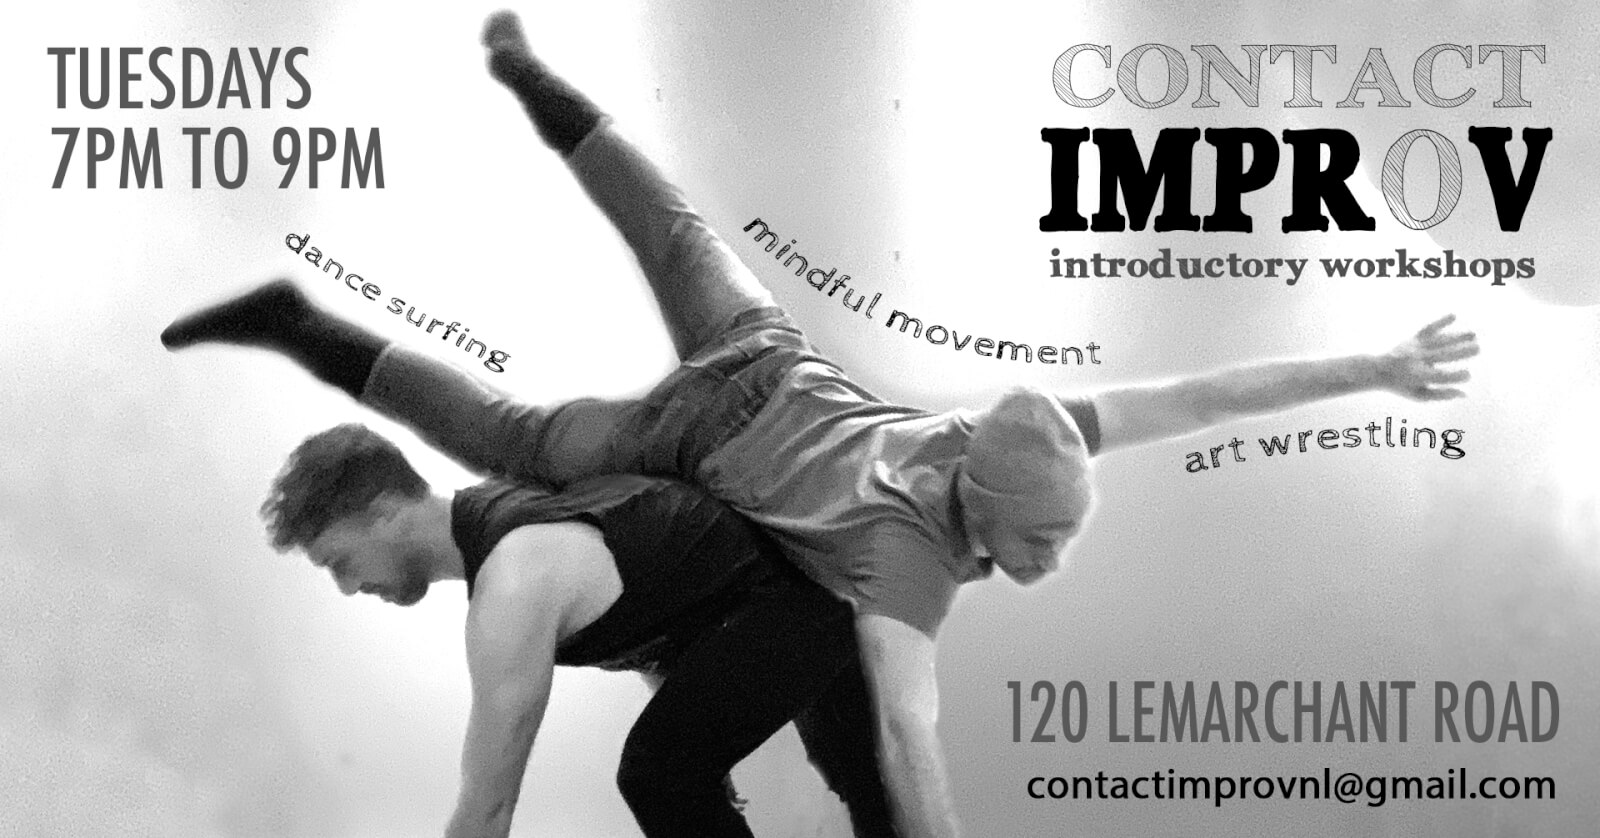 CONTACT IMPROV introductory workshops